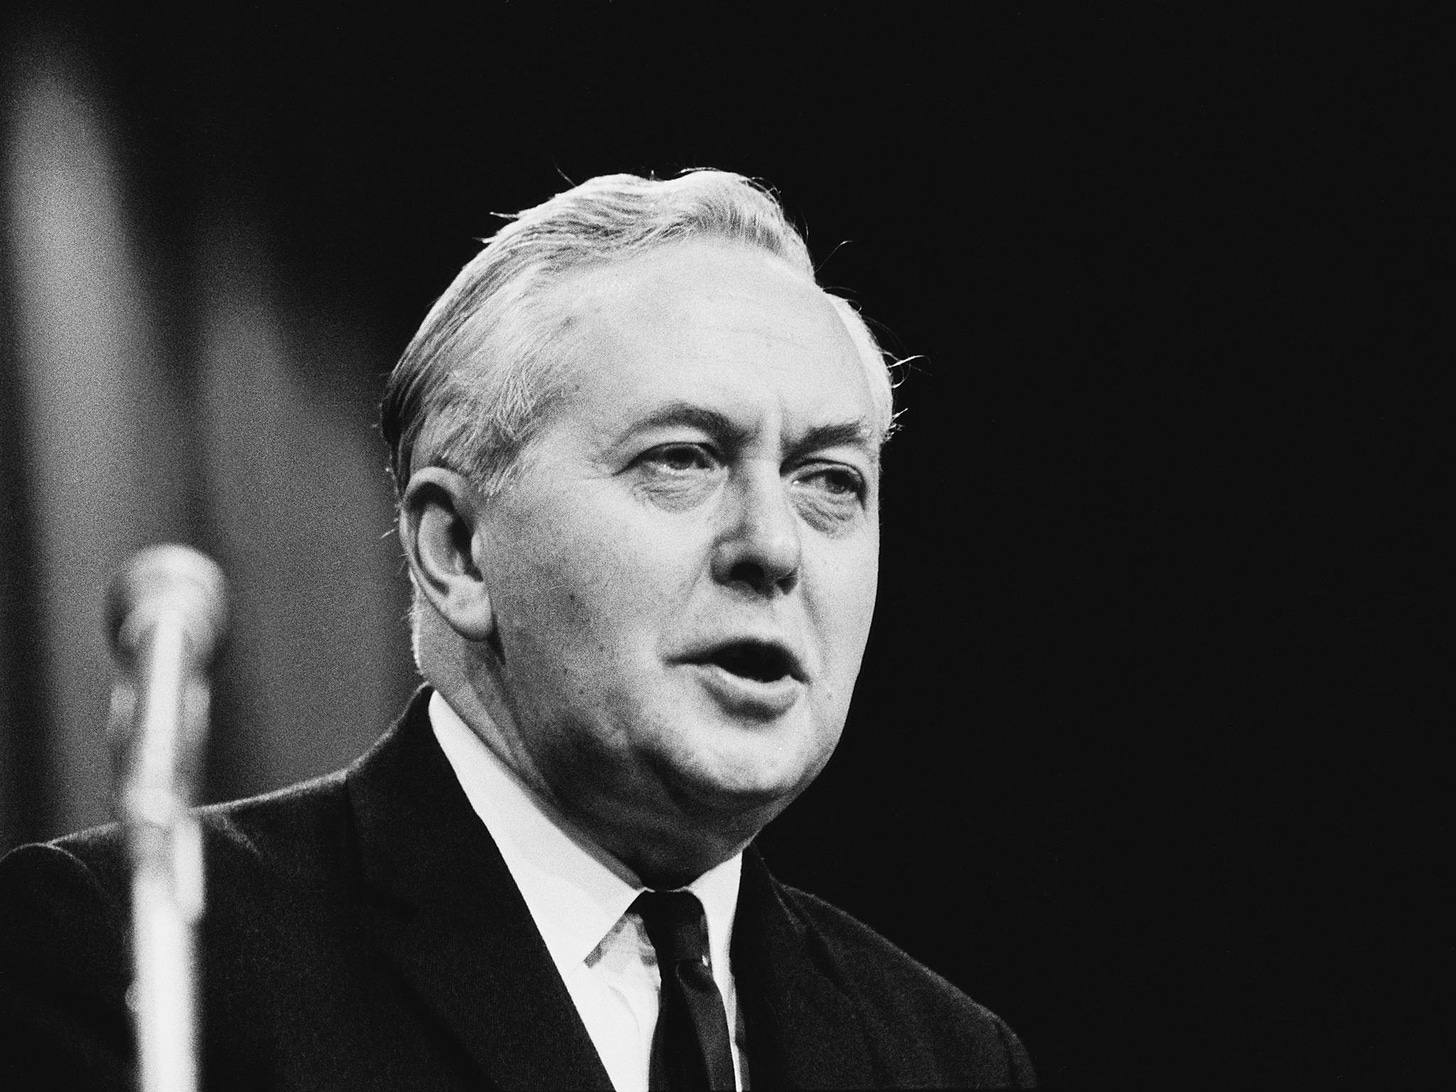 A Life in Focus: Harold Wilson, Labour prime minister who won four general  elections but remained an enigma | The Independent | The Independent